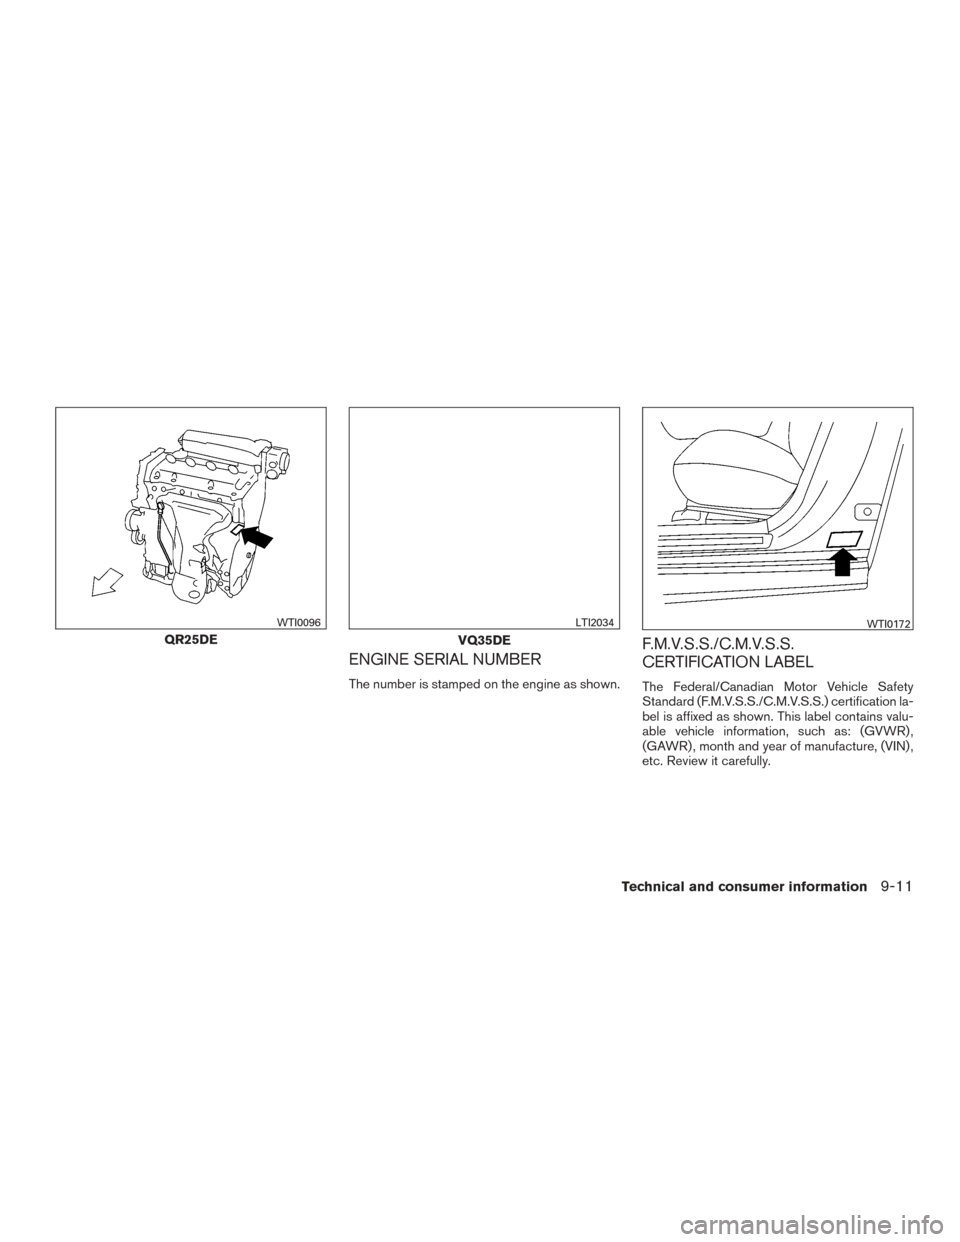 NISSAN ALTIMA 2016 L33 / 5.G Owners Manual ENGINE SERIAL NUMBER
The number is stamped on the engine as shown.
F.M.V.S.S./C.M.V.S.S.
CERTIFICATION LABEL
The Federal/Canadian Motor Vehicle Safety
Standard (F.M.V.S.S./C.M.V.S.S.) certification la